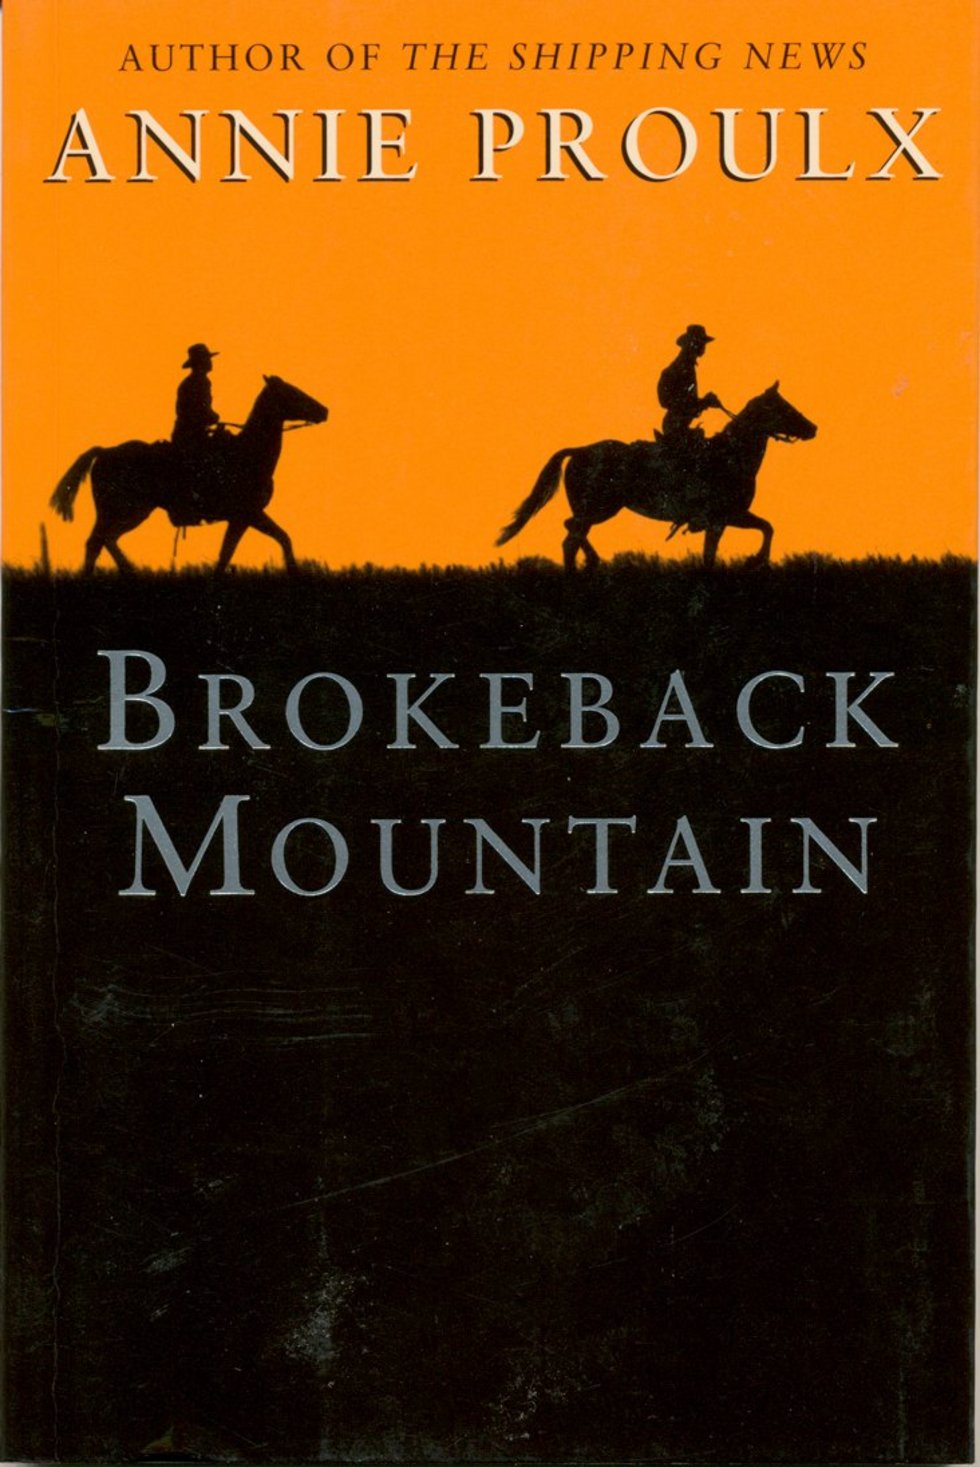 brokeback mountain by annie proulx